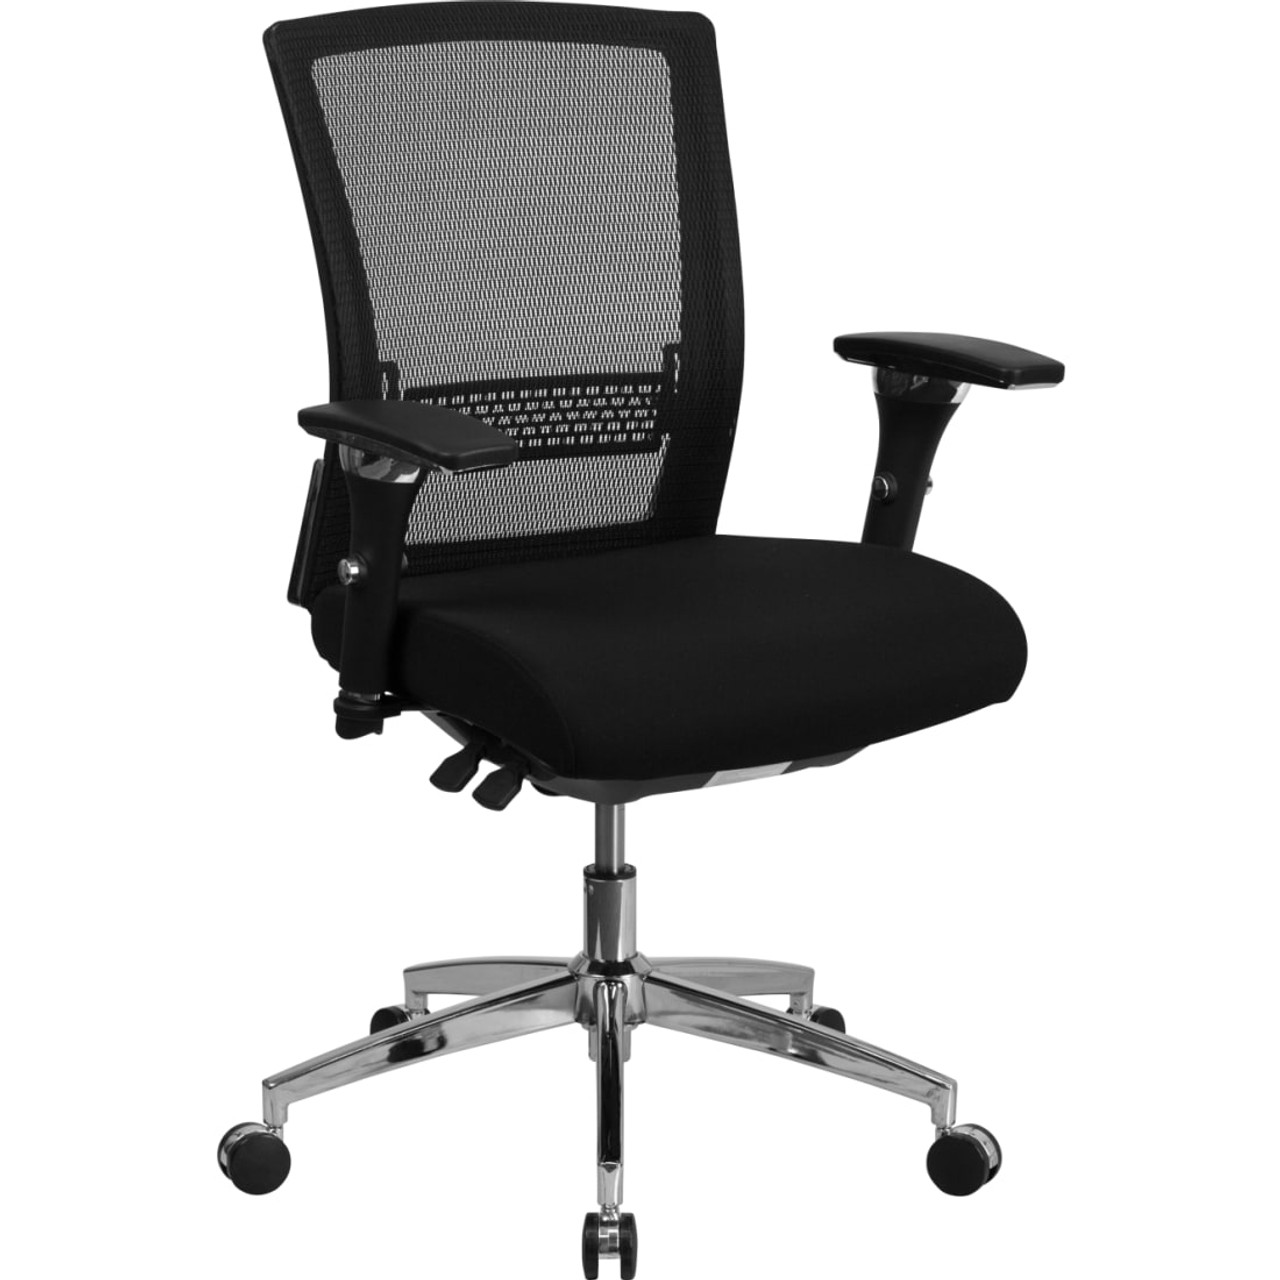 HERCULES Series 24/7 Intensive Use 300 lb. Rated Black Mesh Multifunction Ergonomic Office Chair with Seat Slider - GOWY858GG